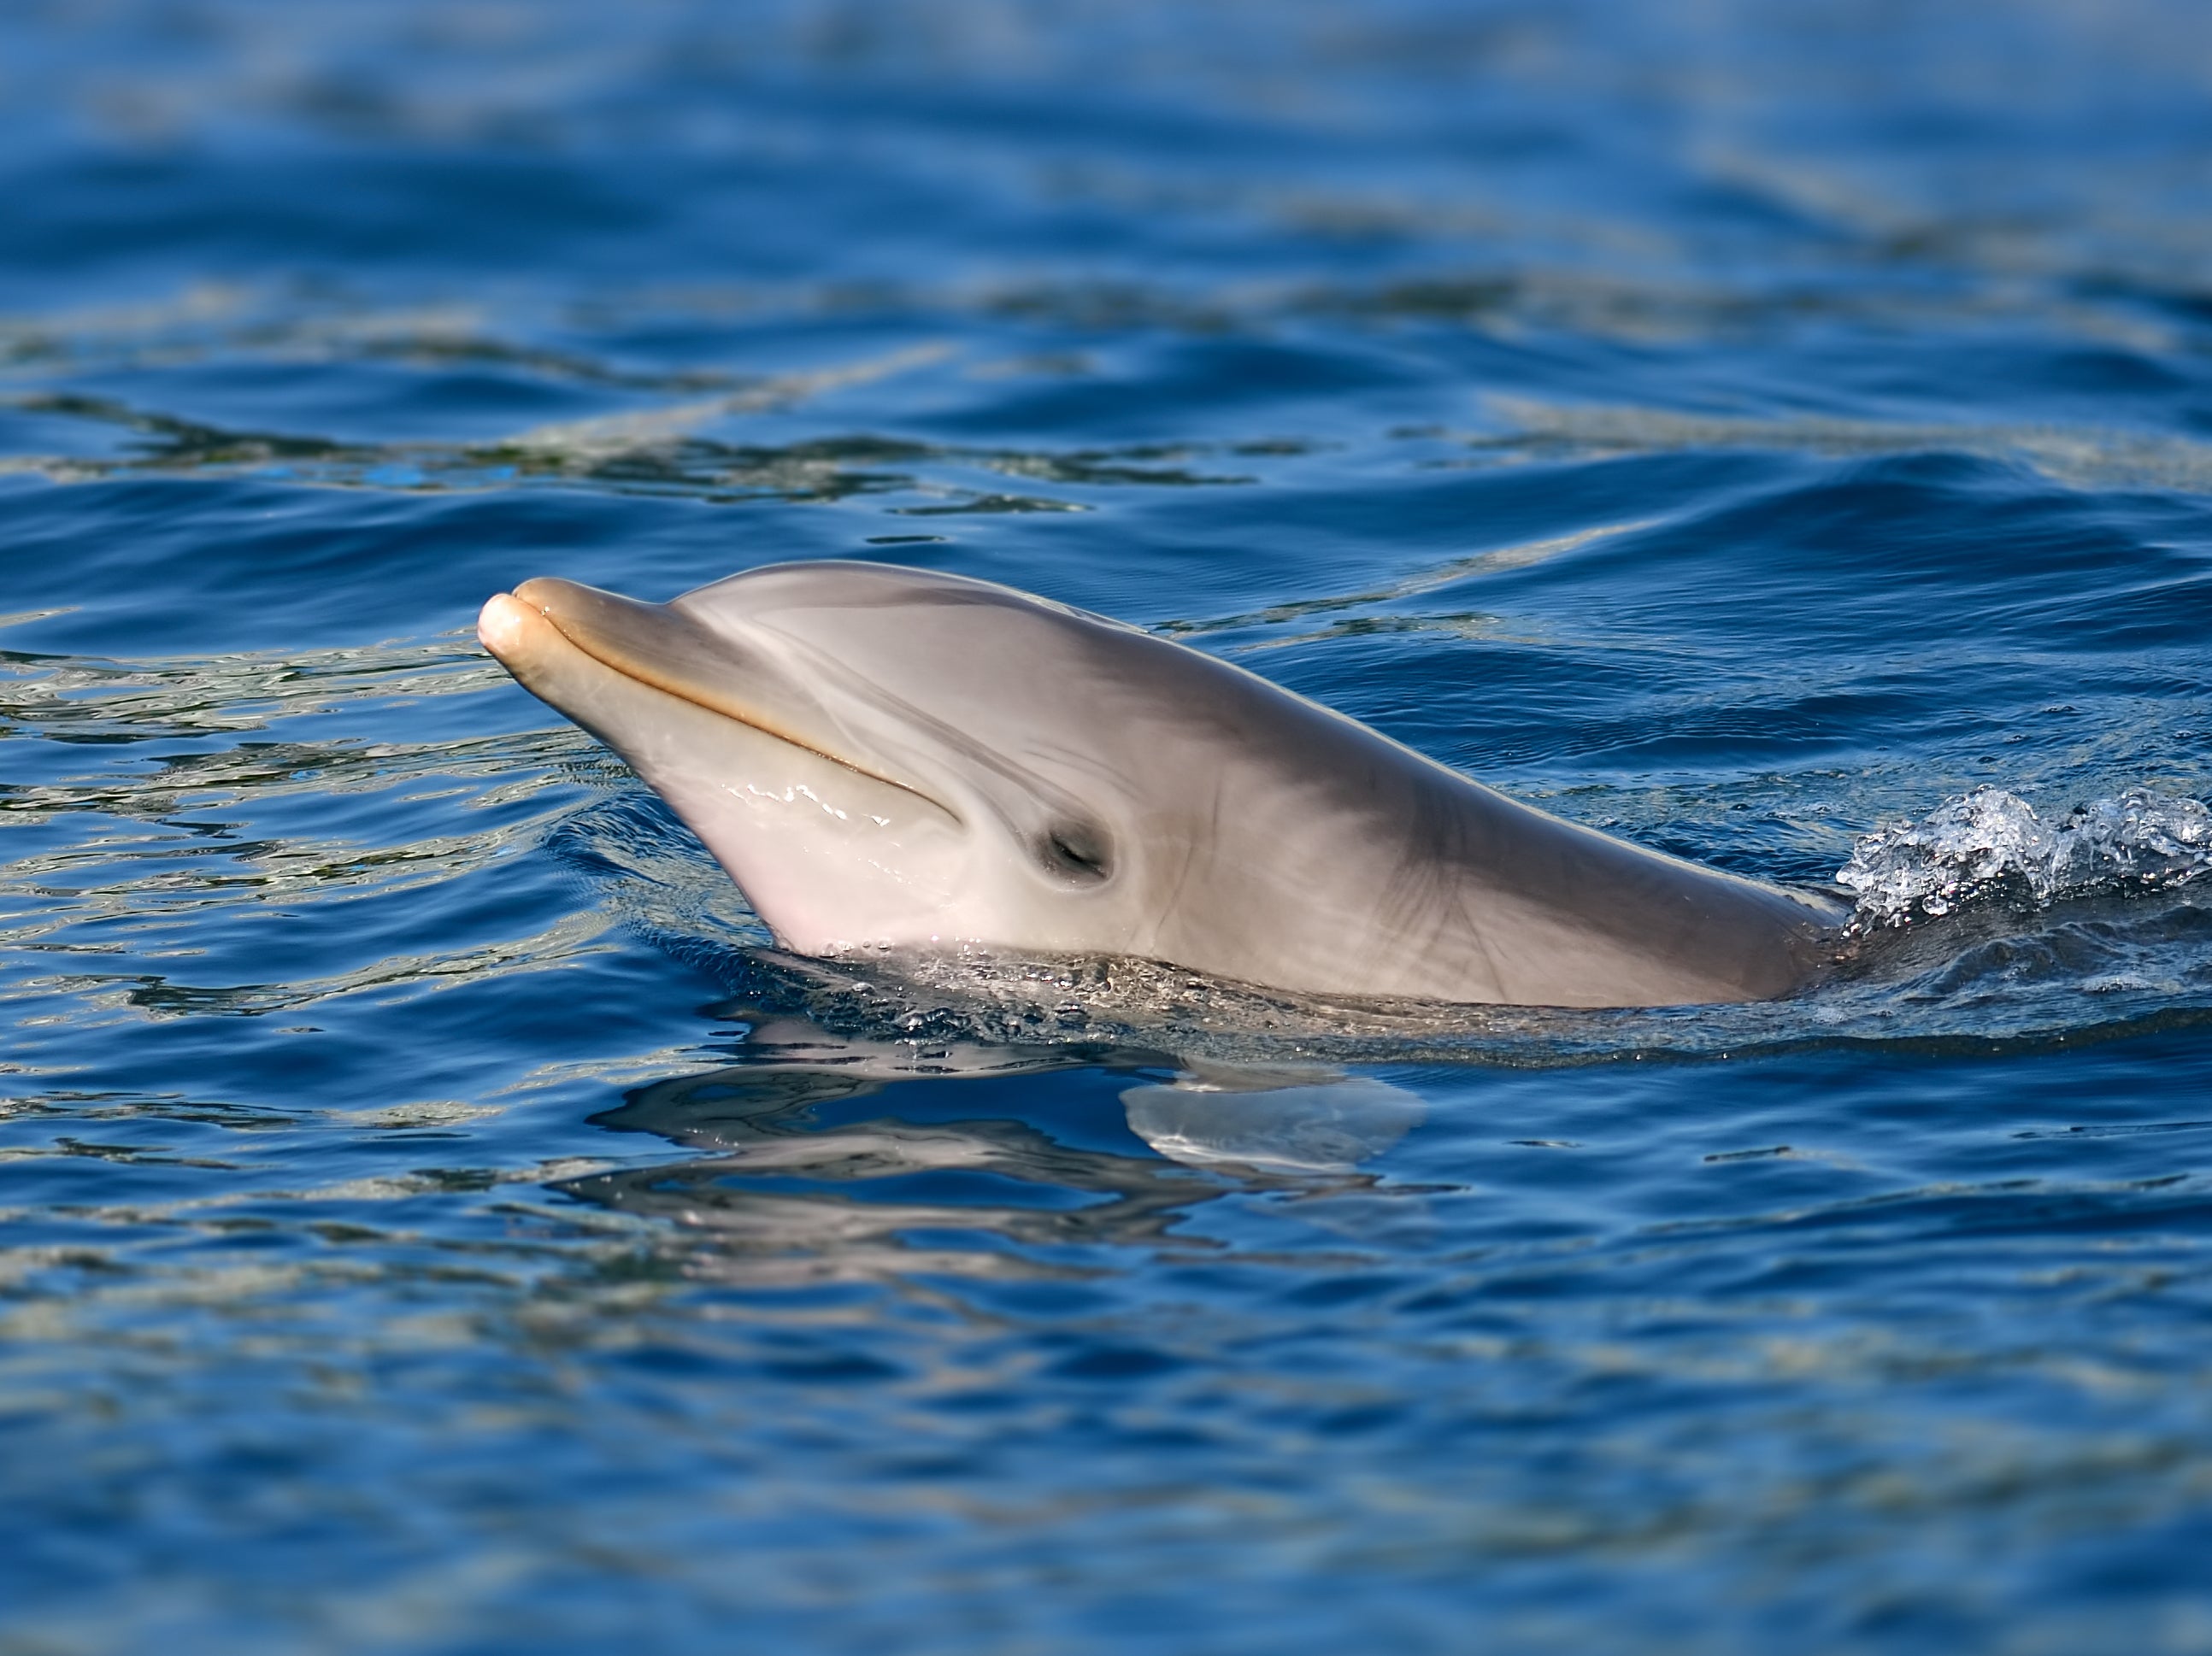 Female dolphins could have working clitorises, study suggests